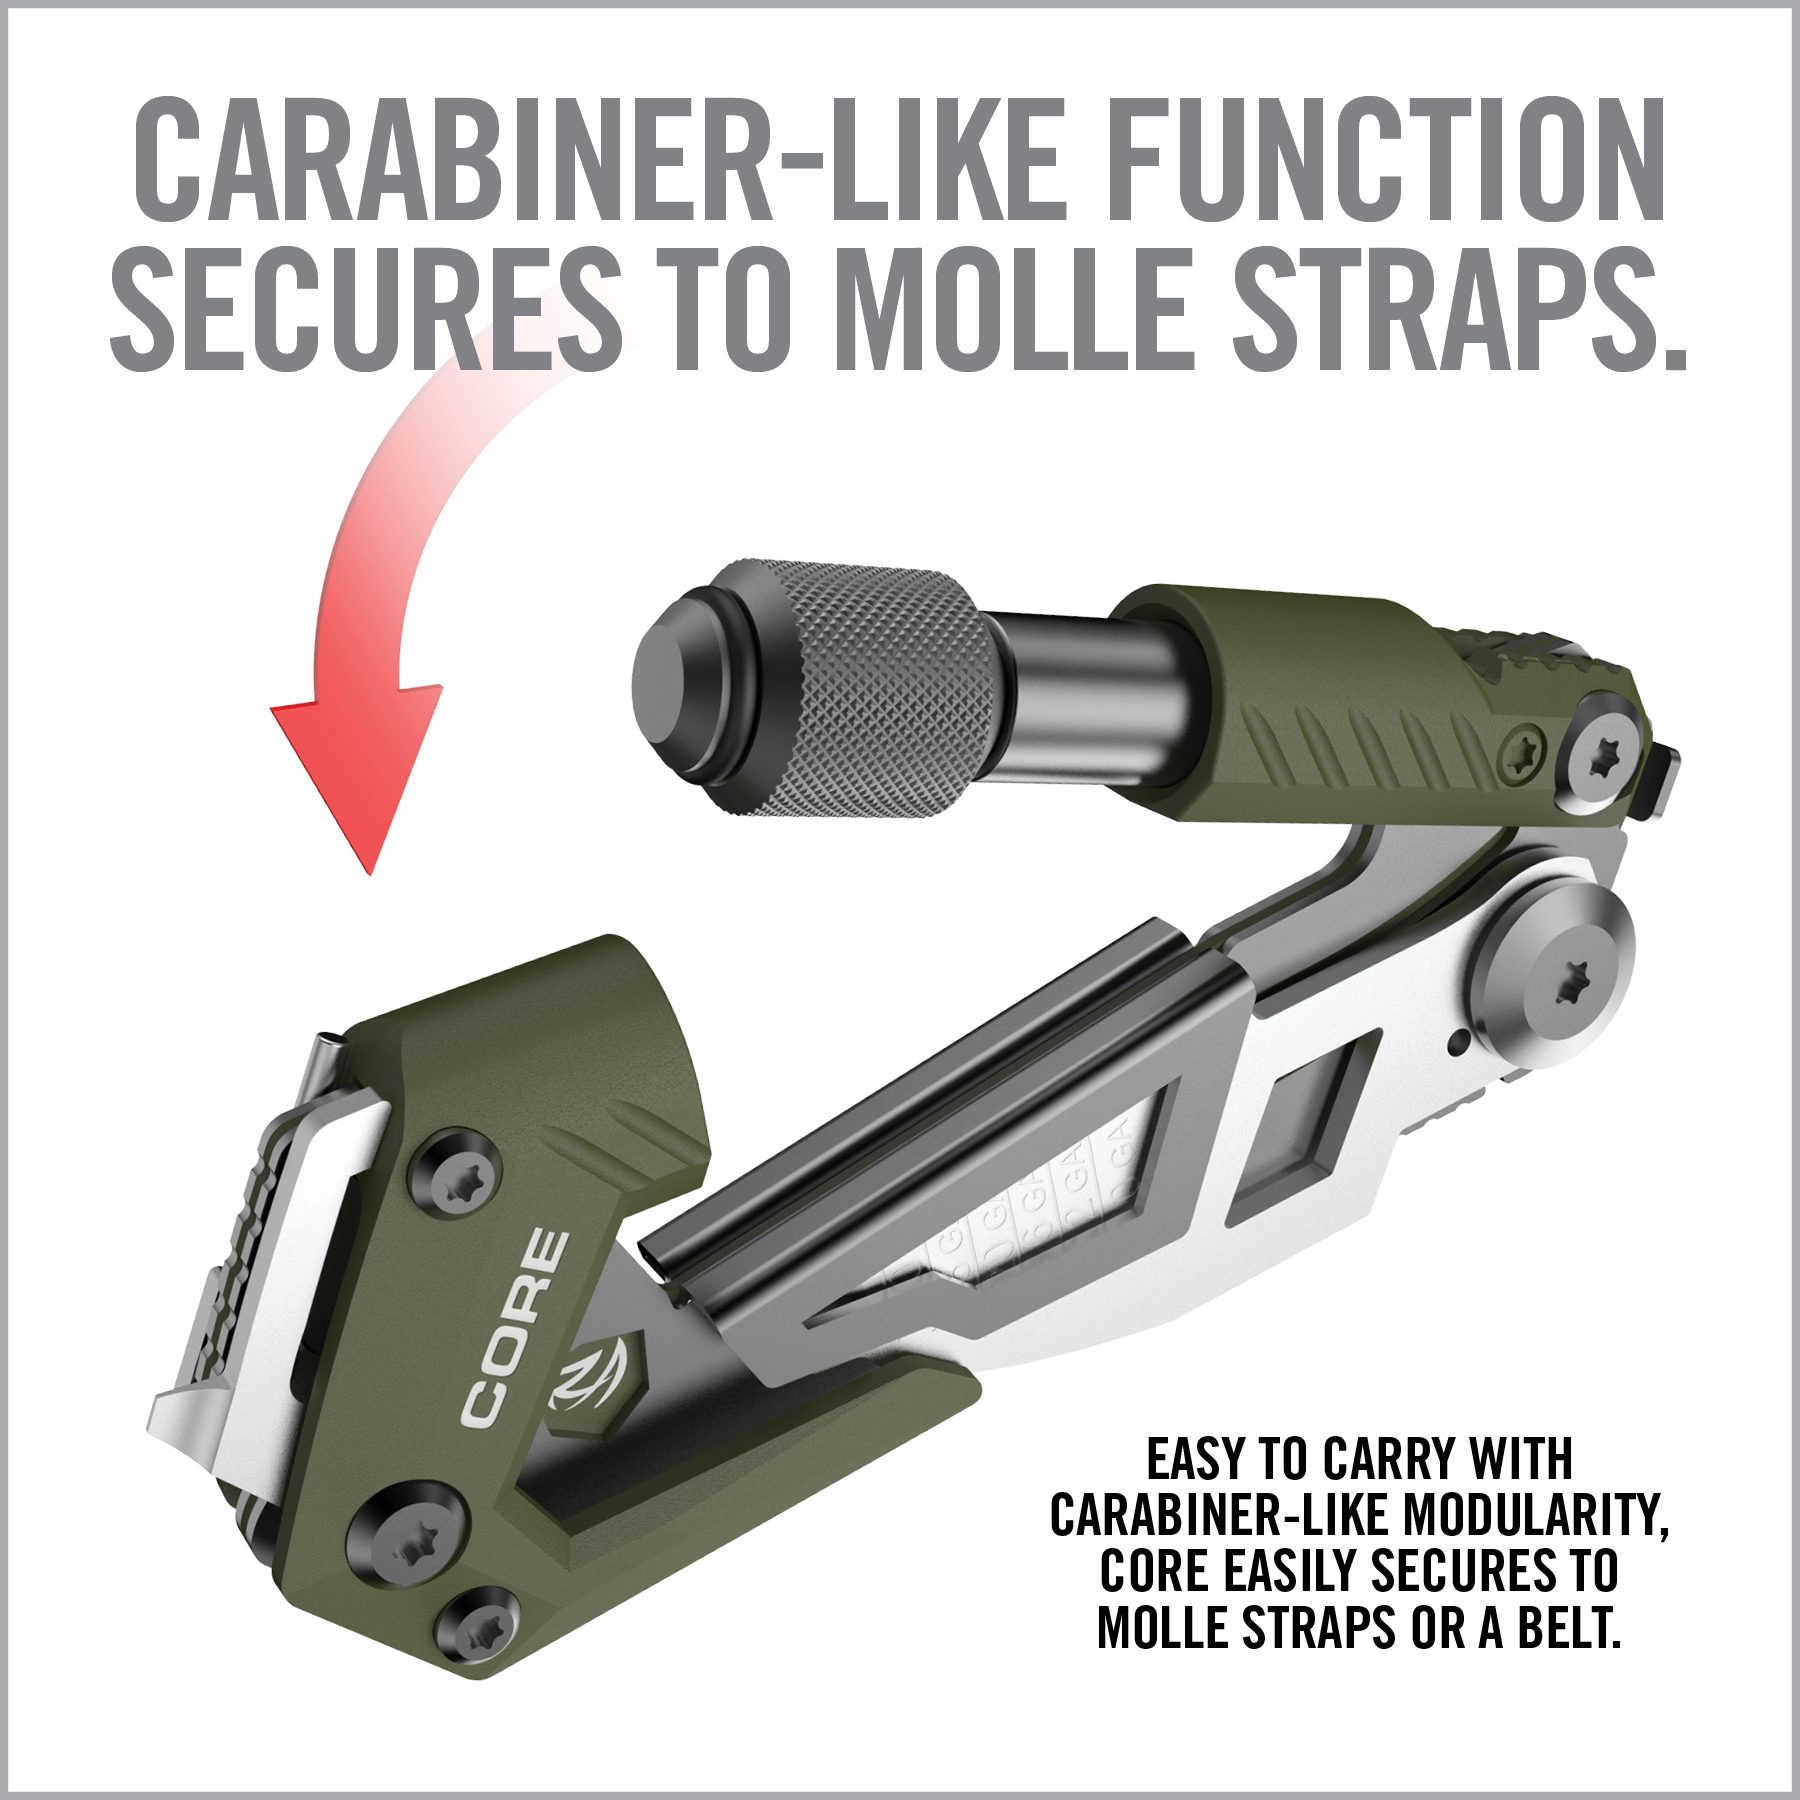 the carabiner - like function secures to molle straps